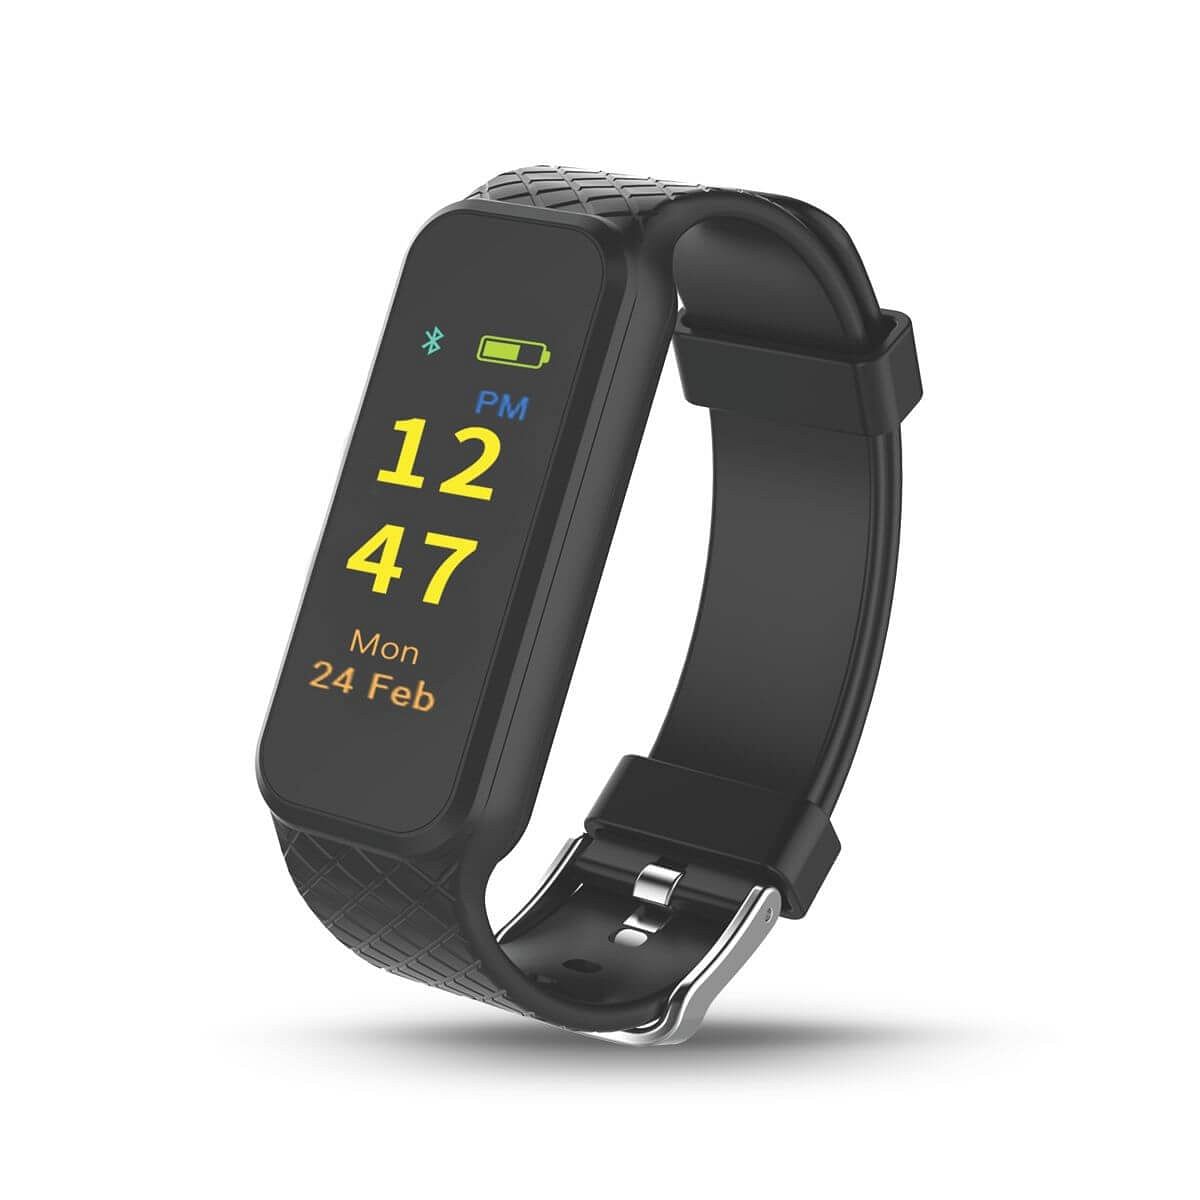 Here’s a look at the top 5 stylish fitness bands you can buy under Rs 5,000 in India.